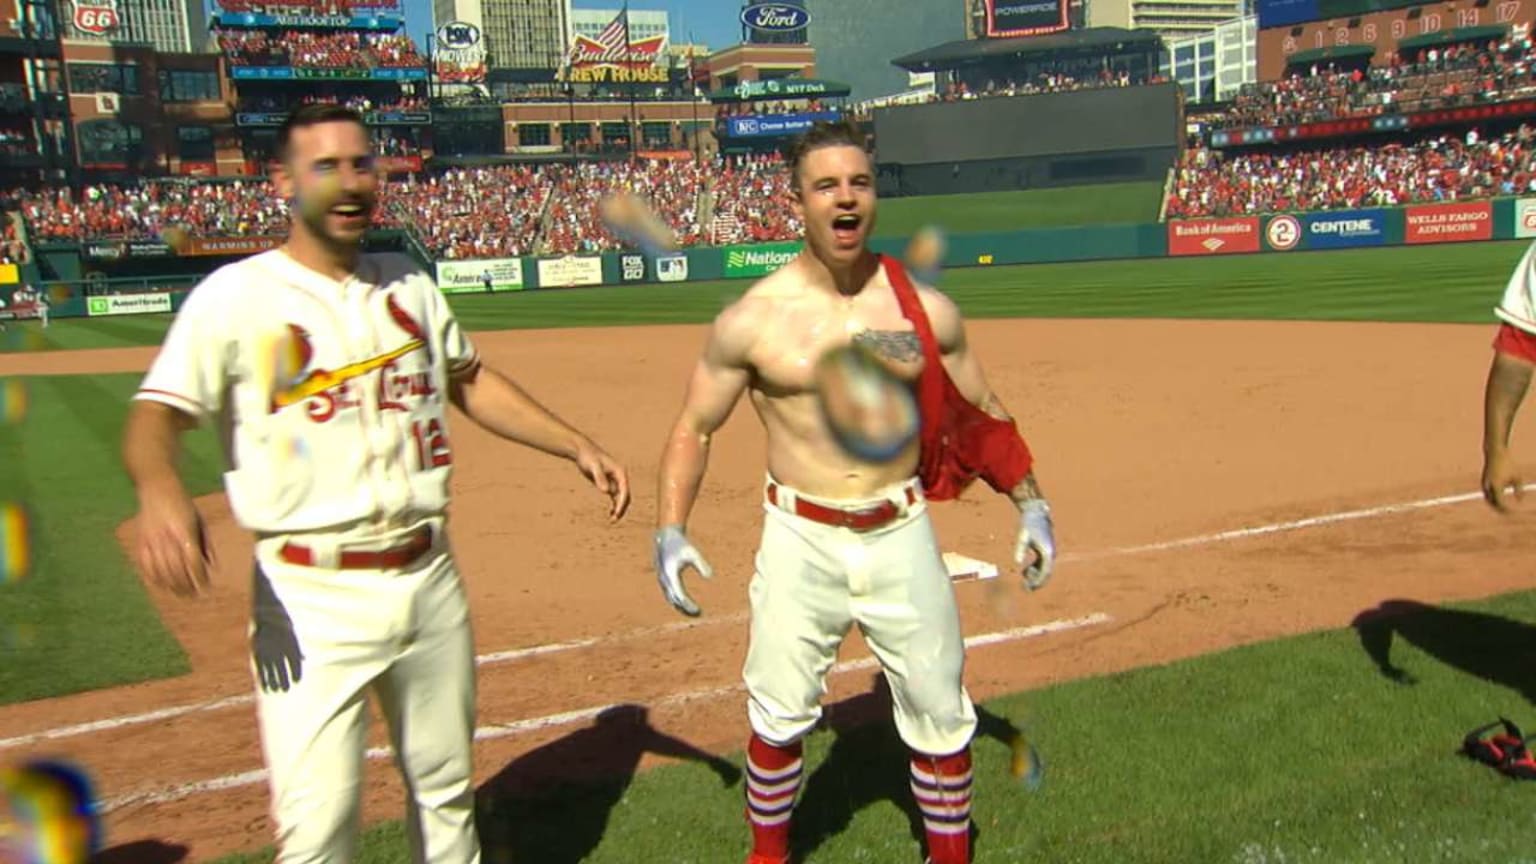 See how insanely jacked Canadian baseball player Tyler O'Neill is after his  walk-off jack - Article - Bardown